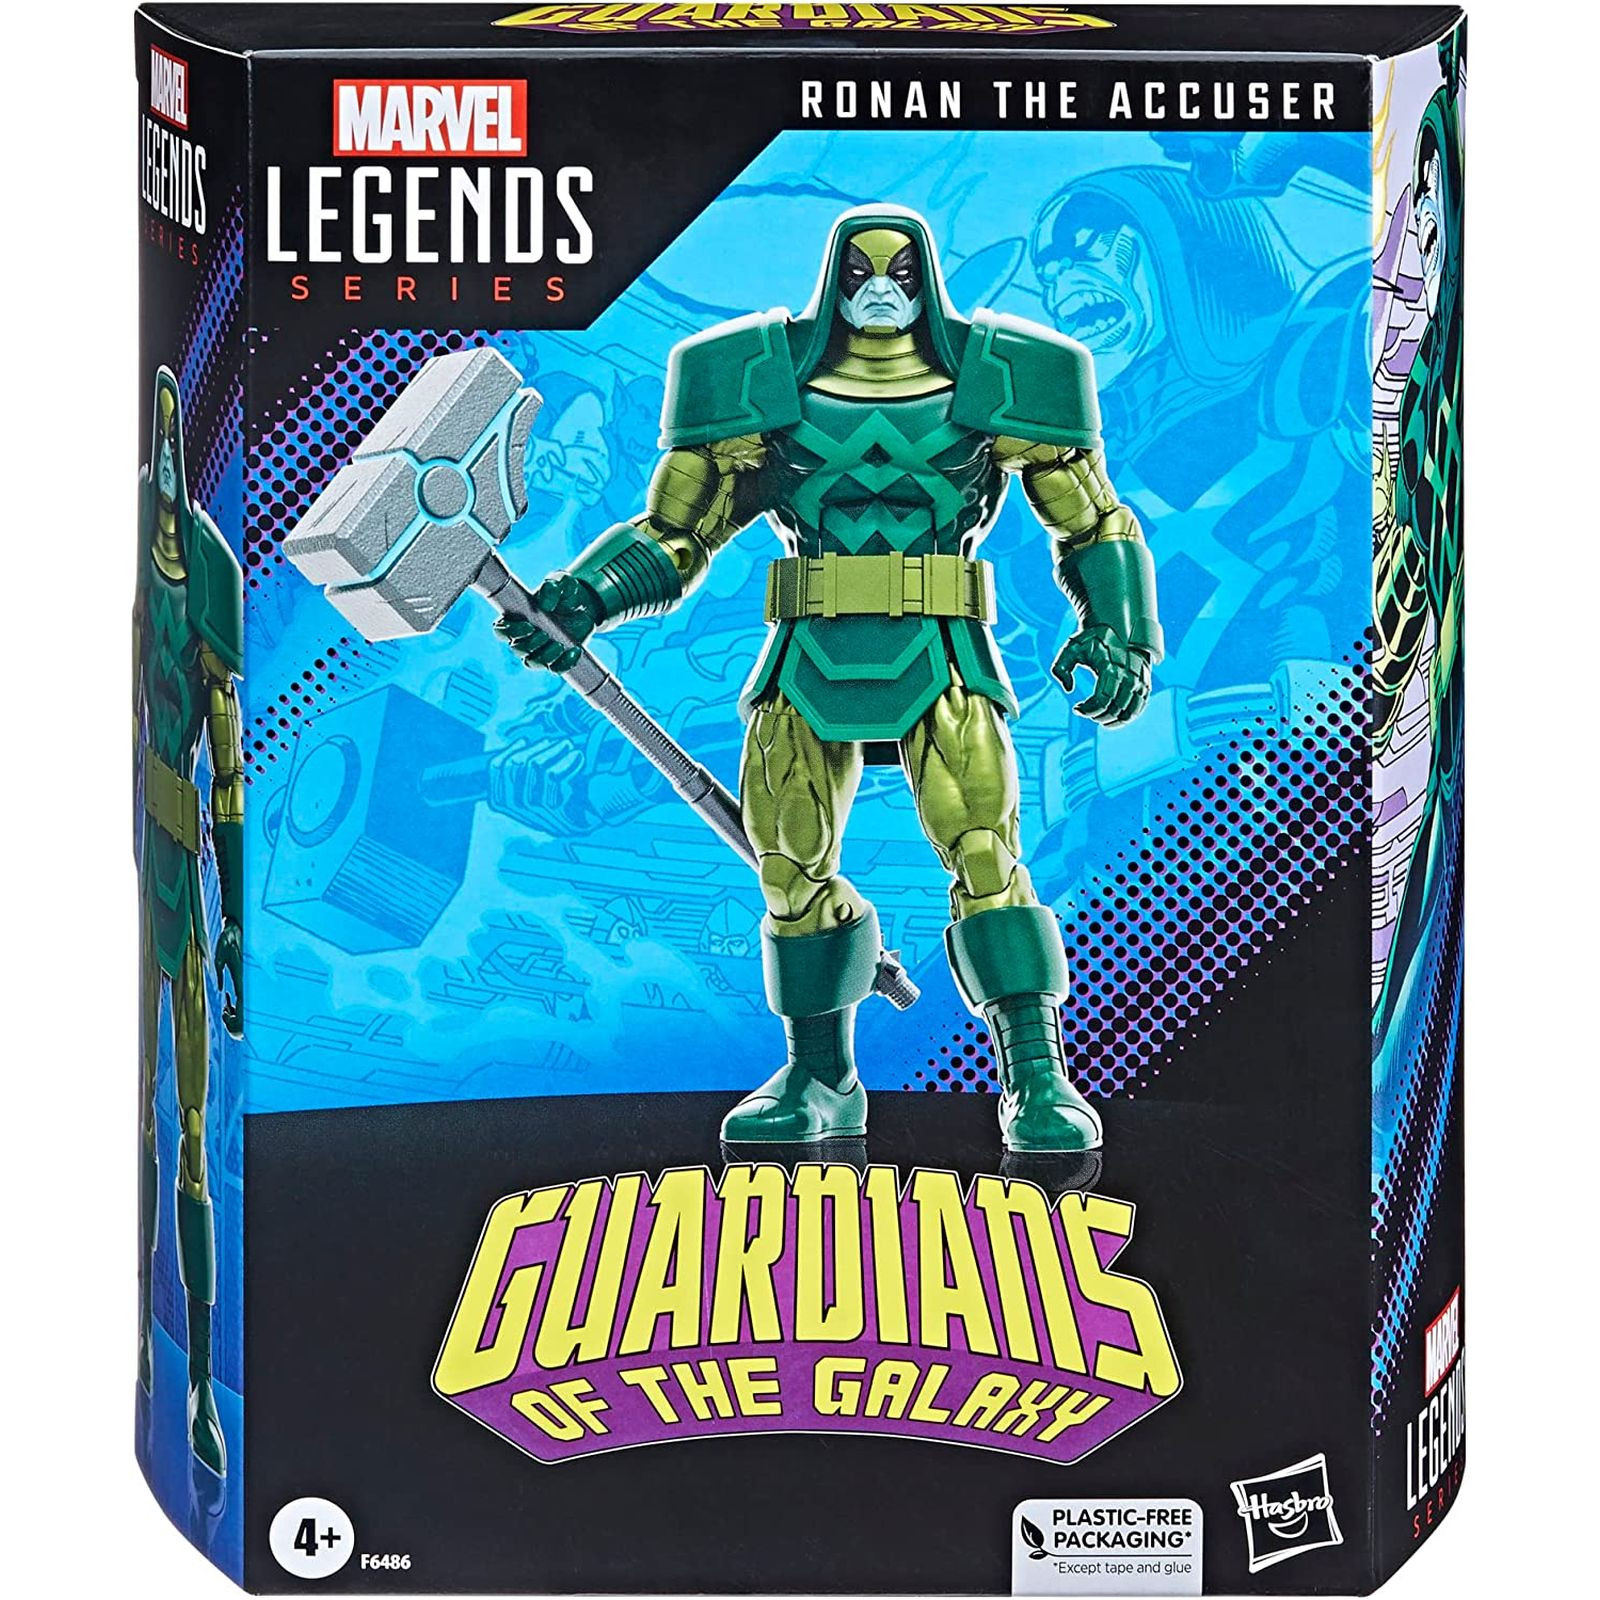 RONAN THE ACCUSER FIG. 15 CM GUARDIANS OF THE GALAXY MARVEL LEGENDS SERIES